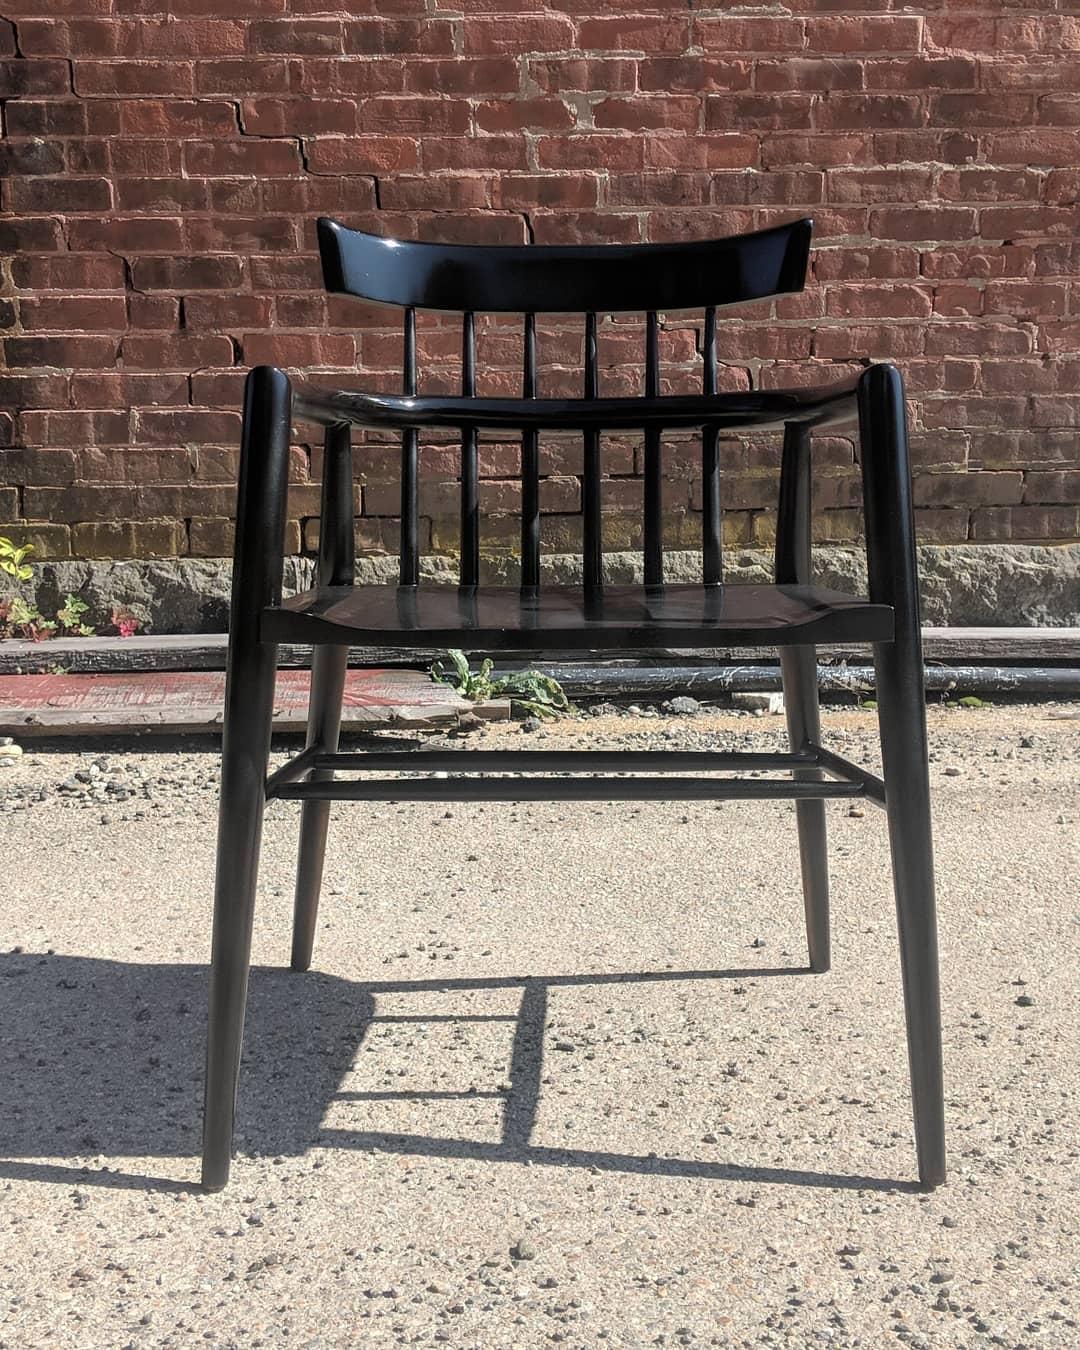 Modernist comb-back windsor chair in black lacquer, designed by Paul McCobb, circa 1955.  Arm height is 25 1/4